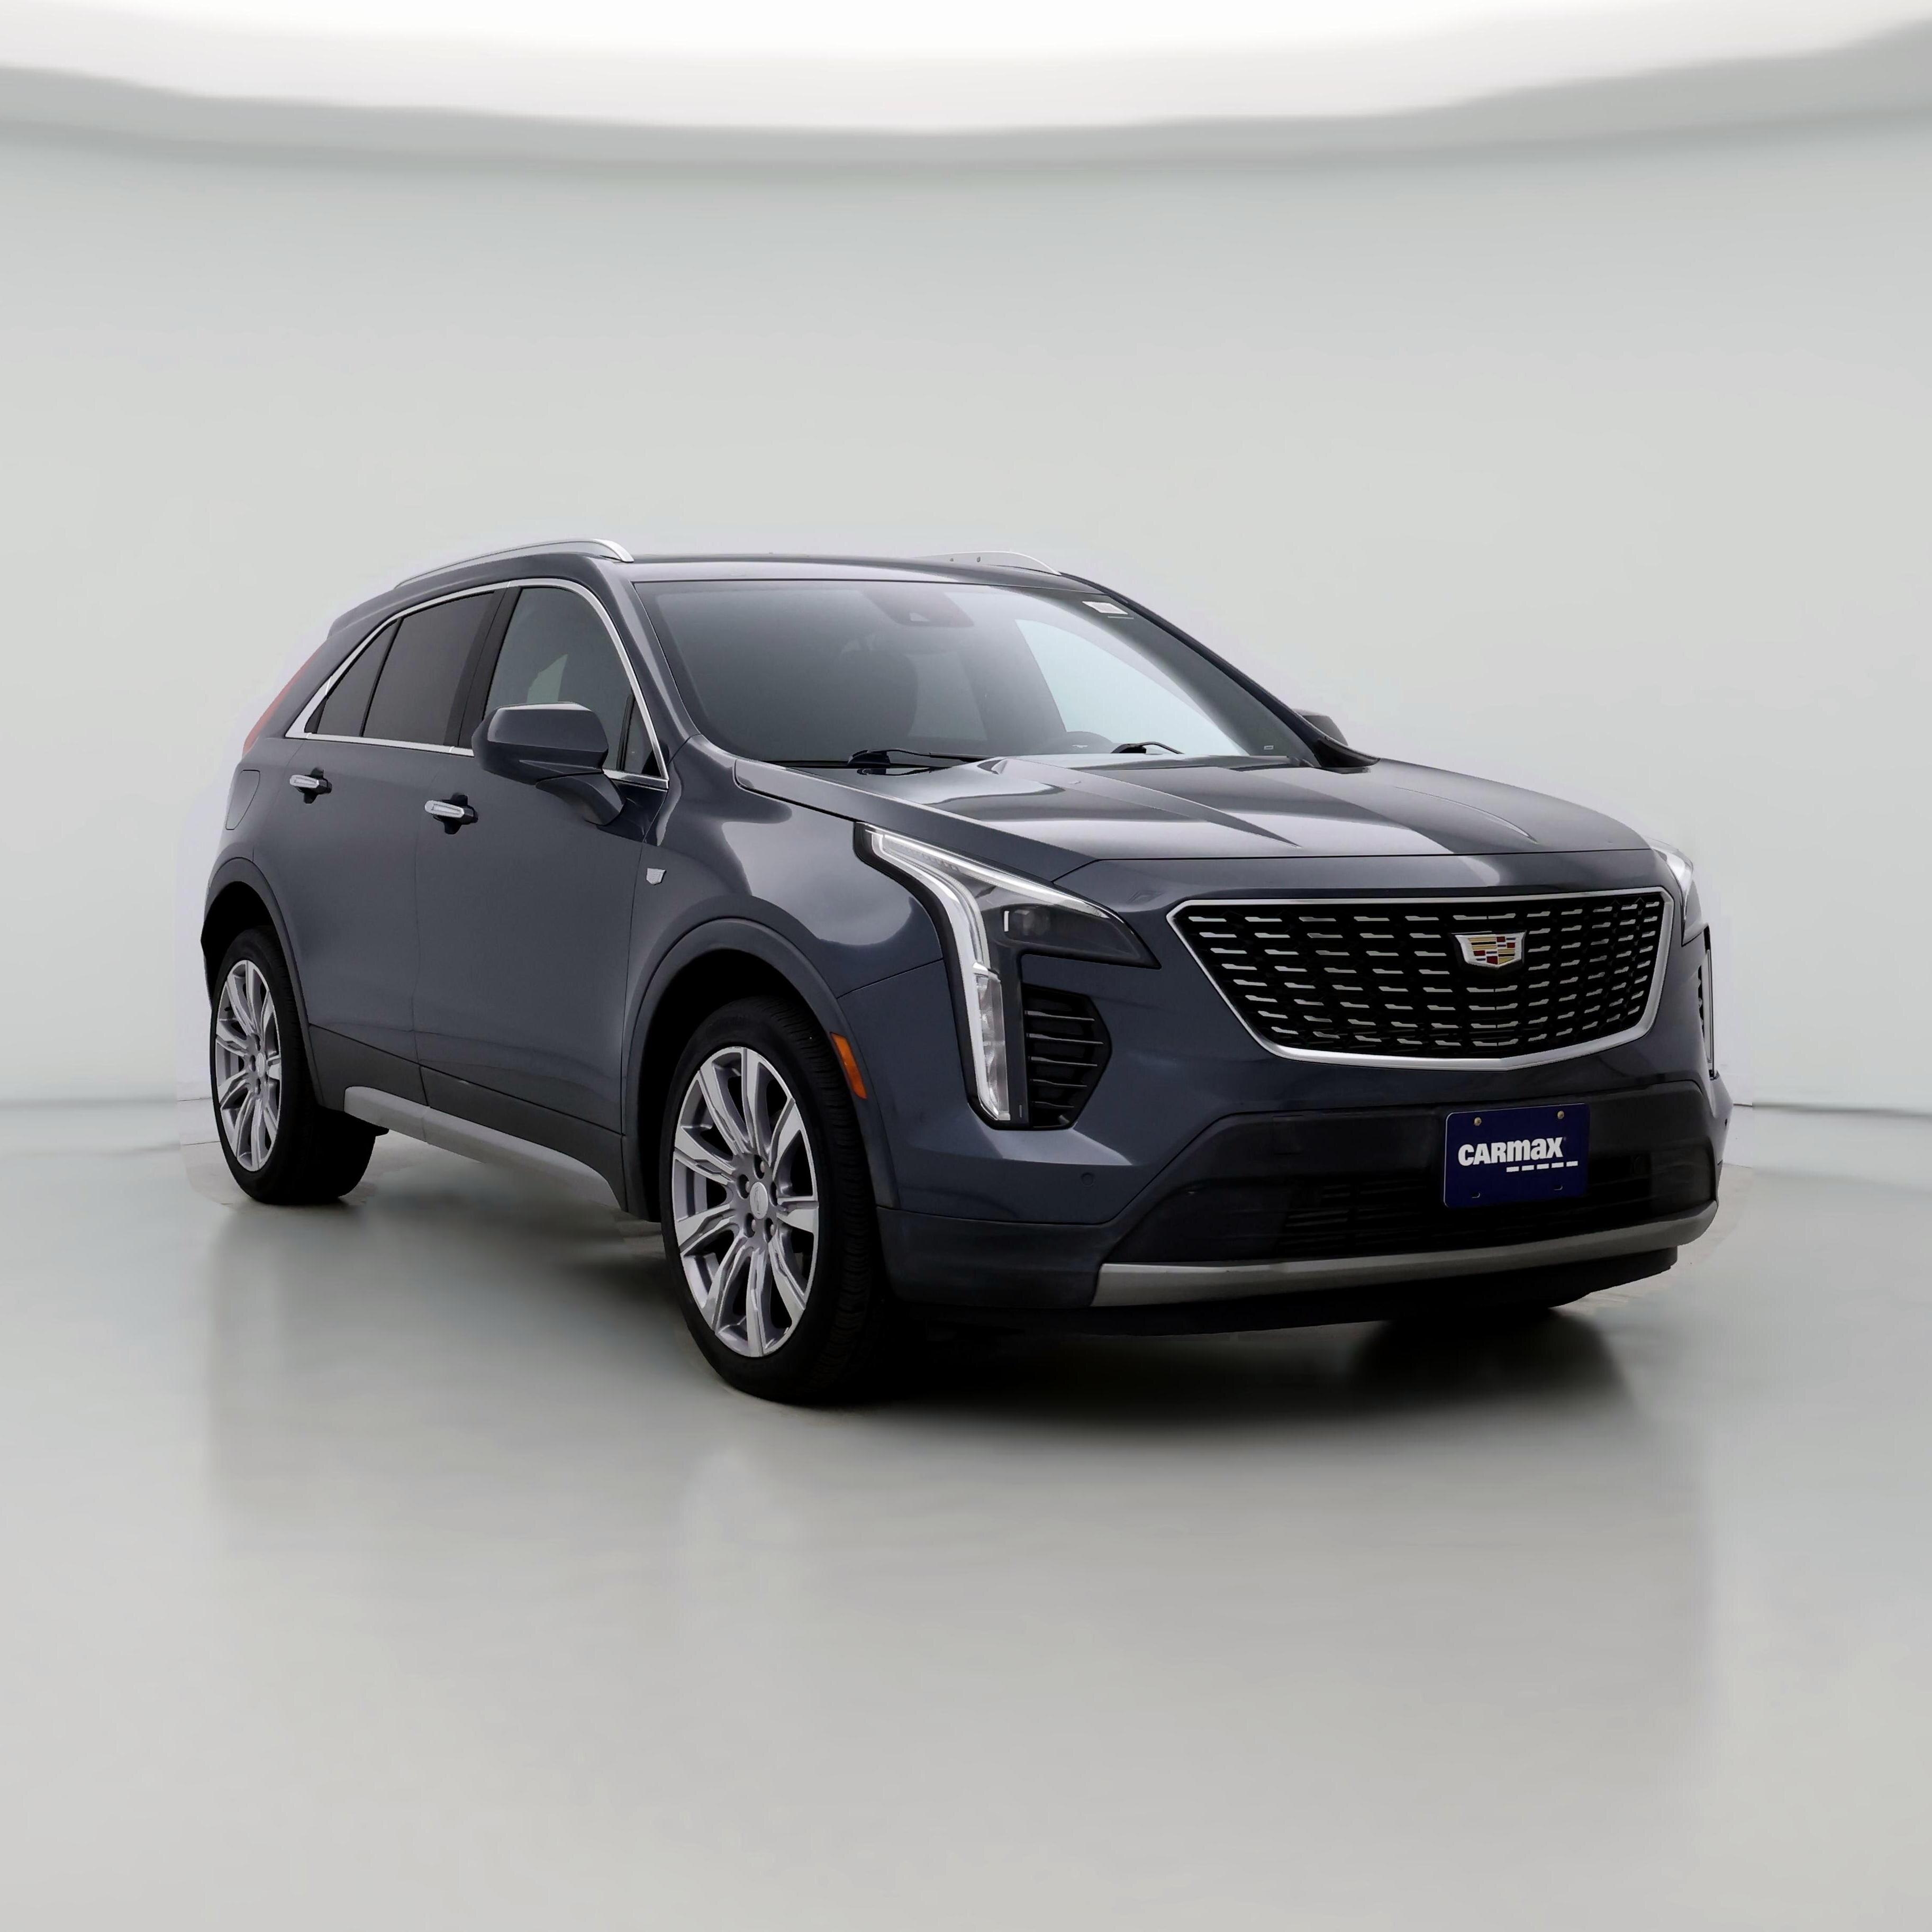 Used 2019 Cadillac XT4 for Sale